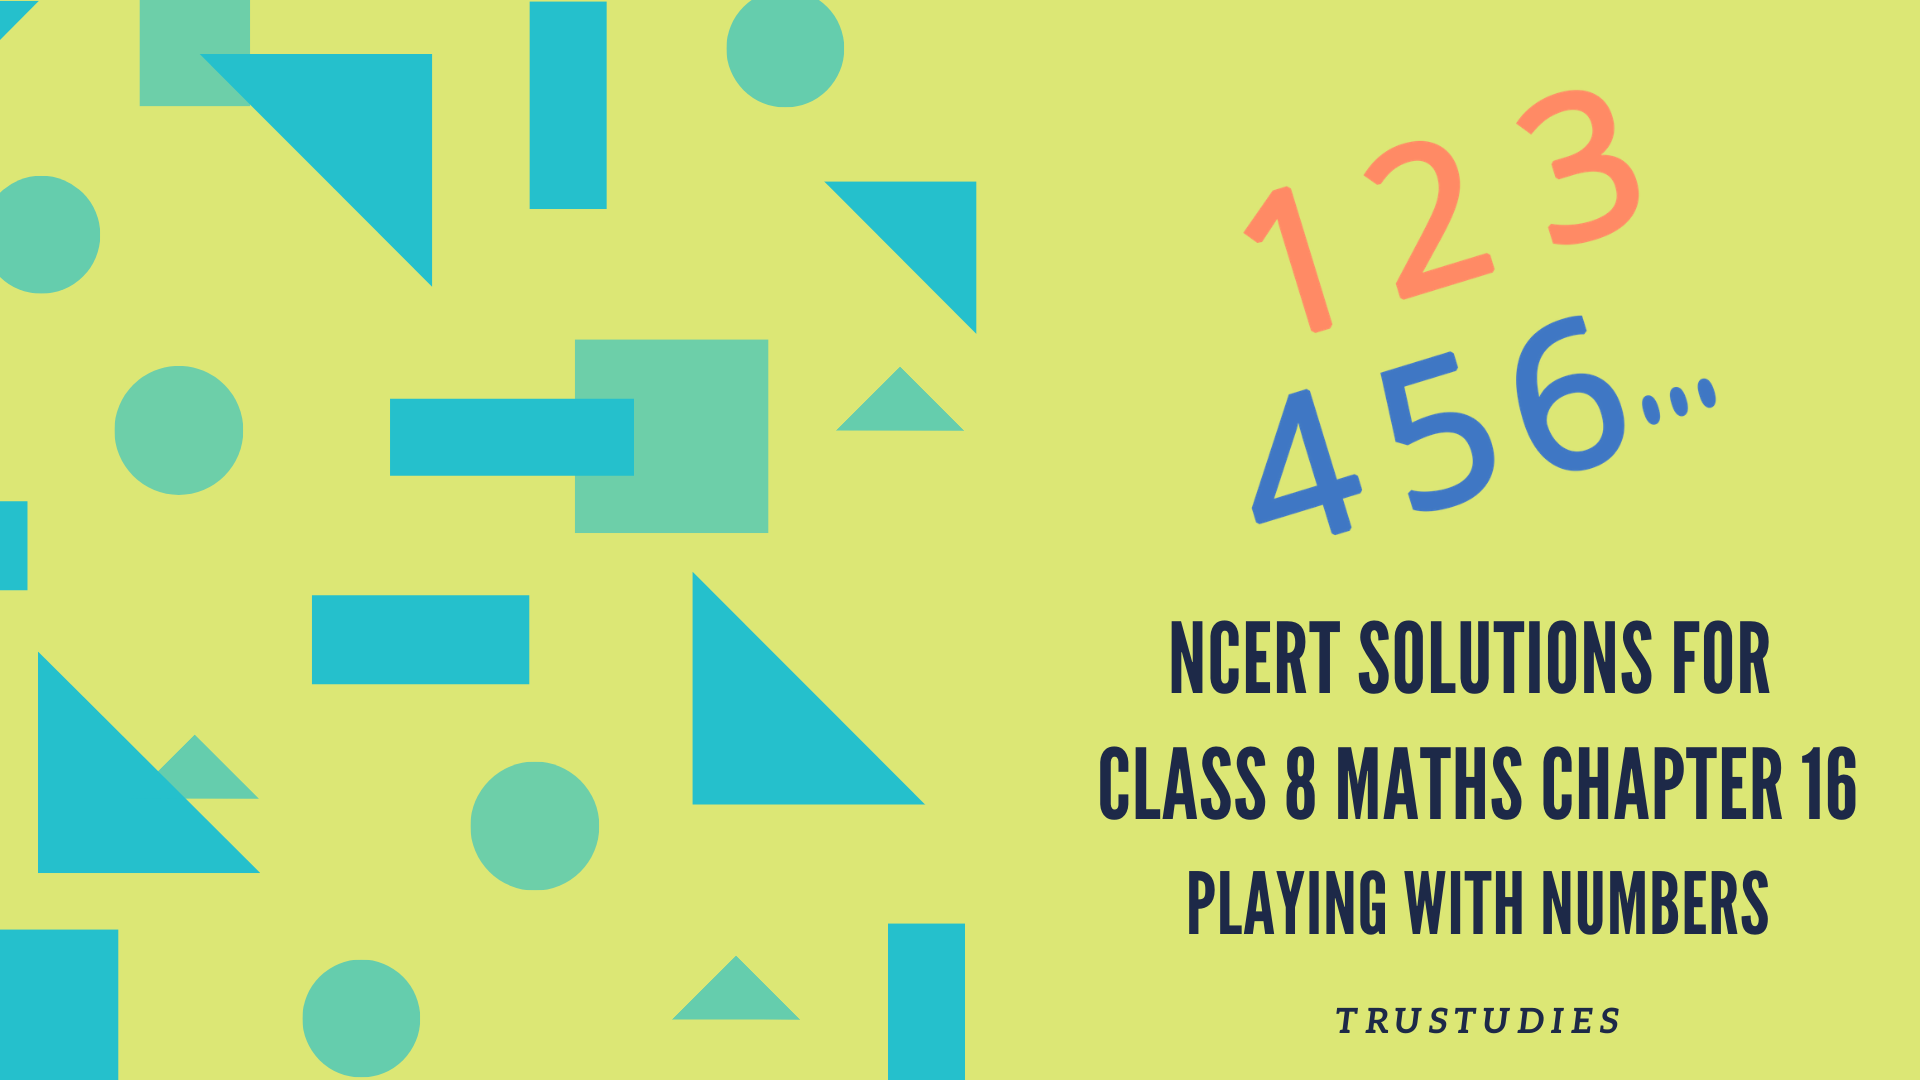 NCERT solutions for class 8 maths chapter 16 playing with numbers banner image